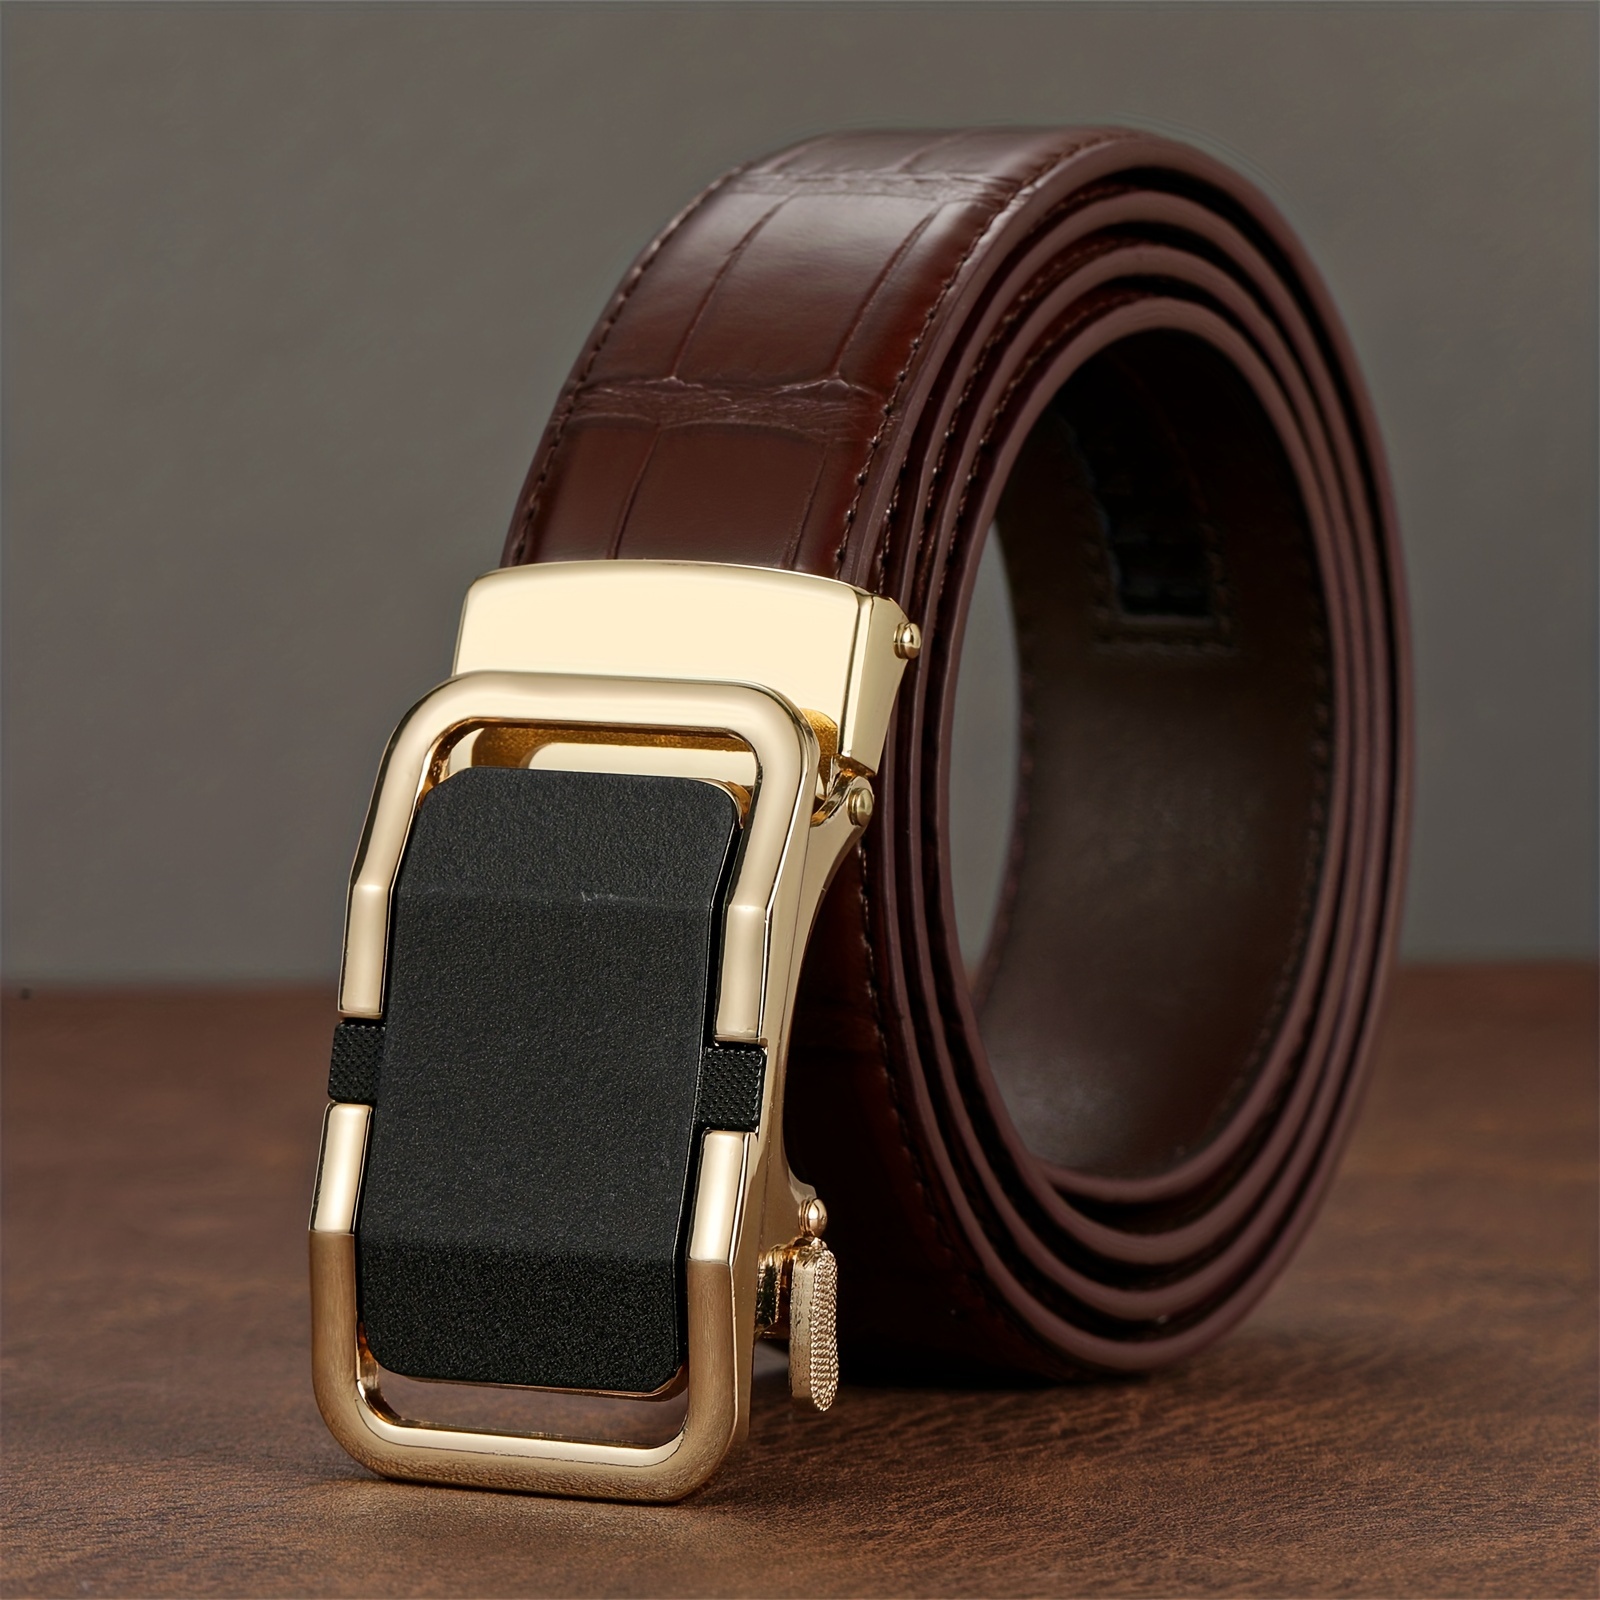 Discounted Men's Frosted Automatic Buckle Belts at Our Store